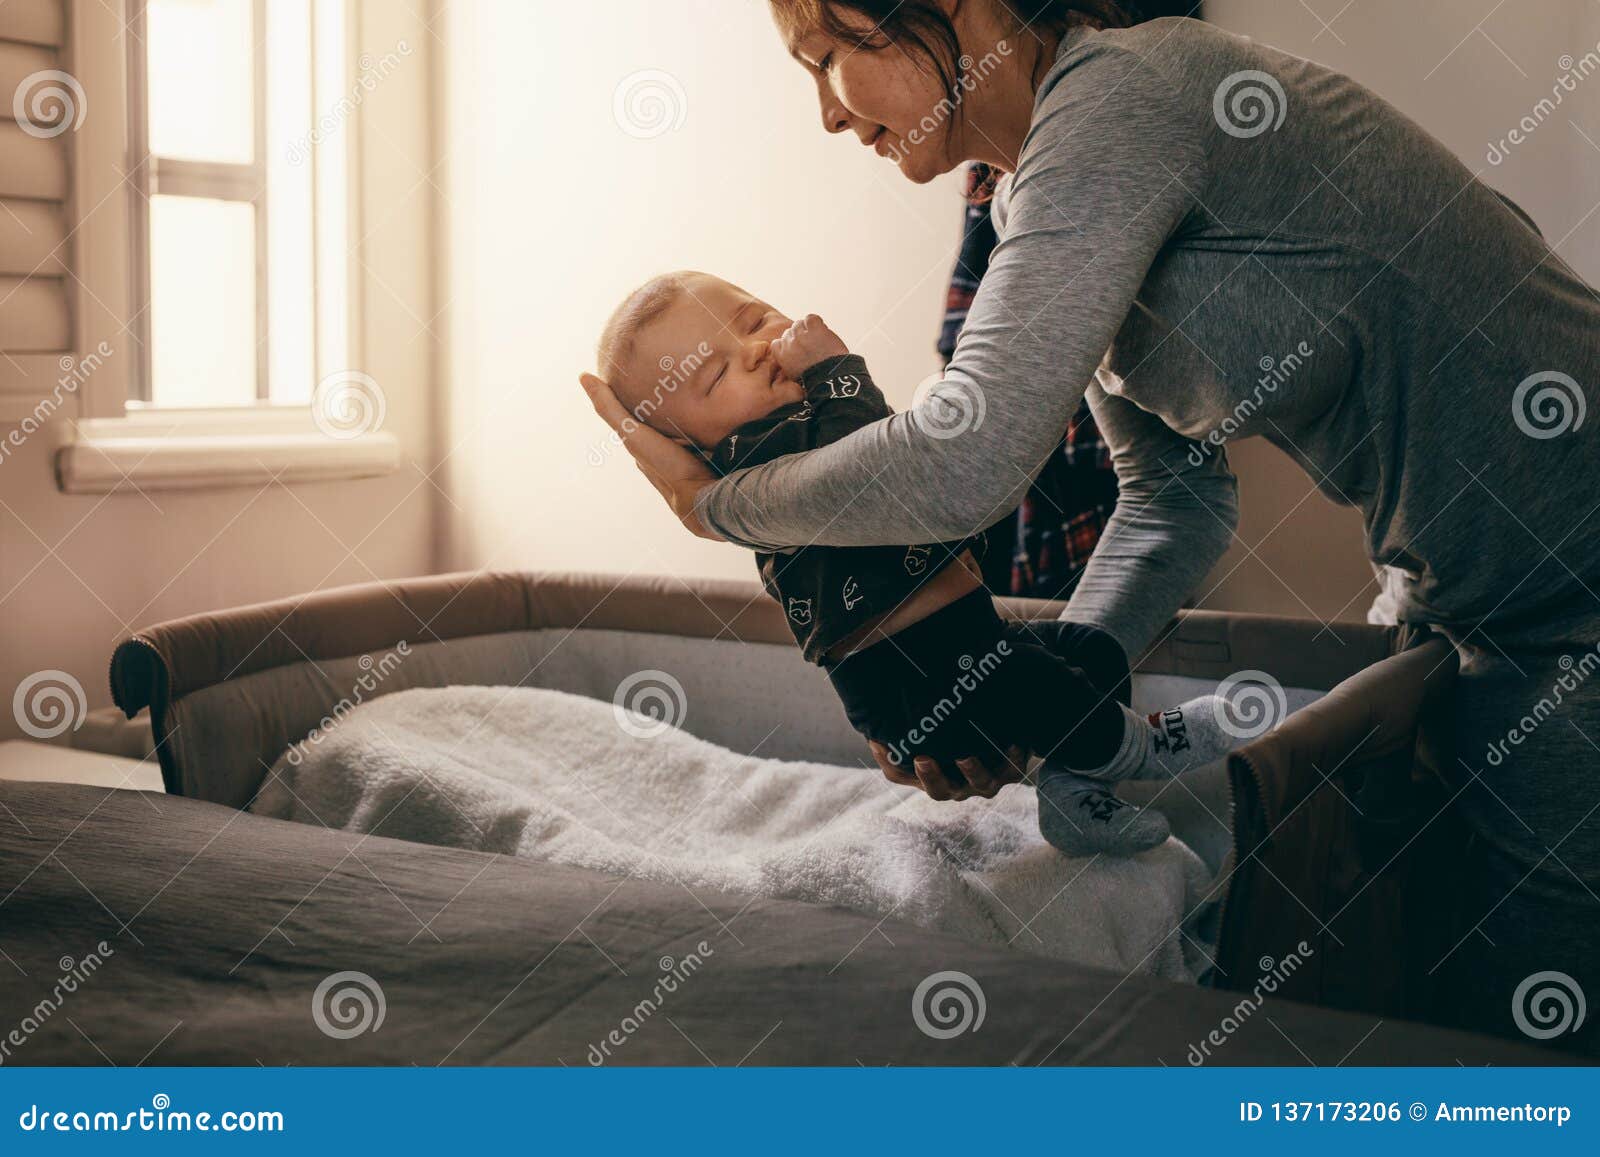 Mother Putting Her Baby To Sleep On A Bedside Baby Crib Stock Photo